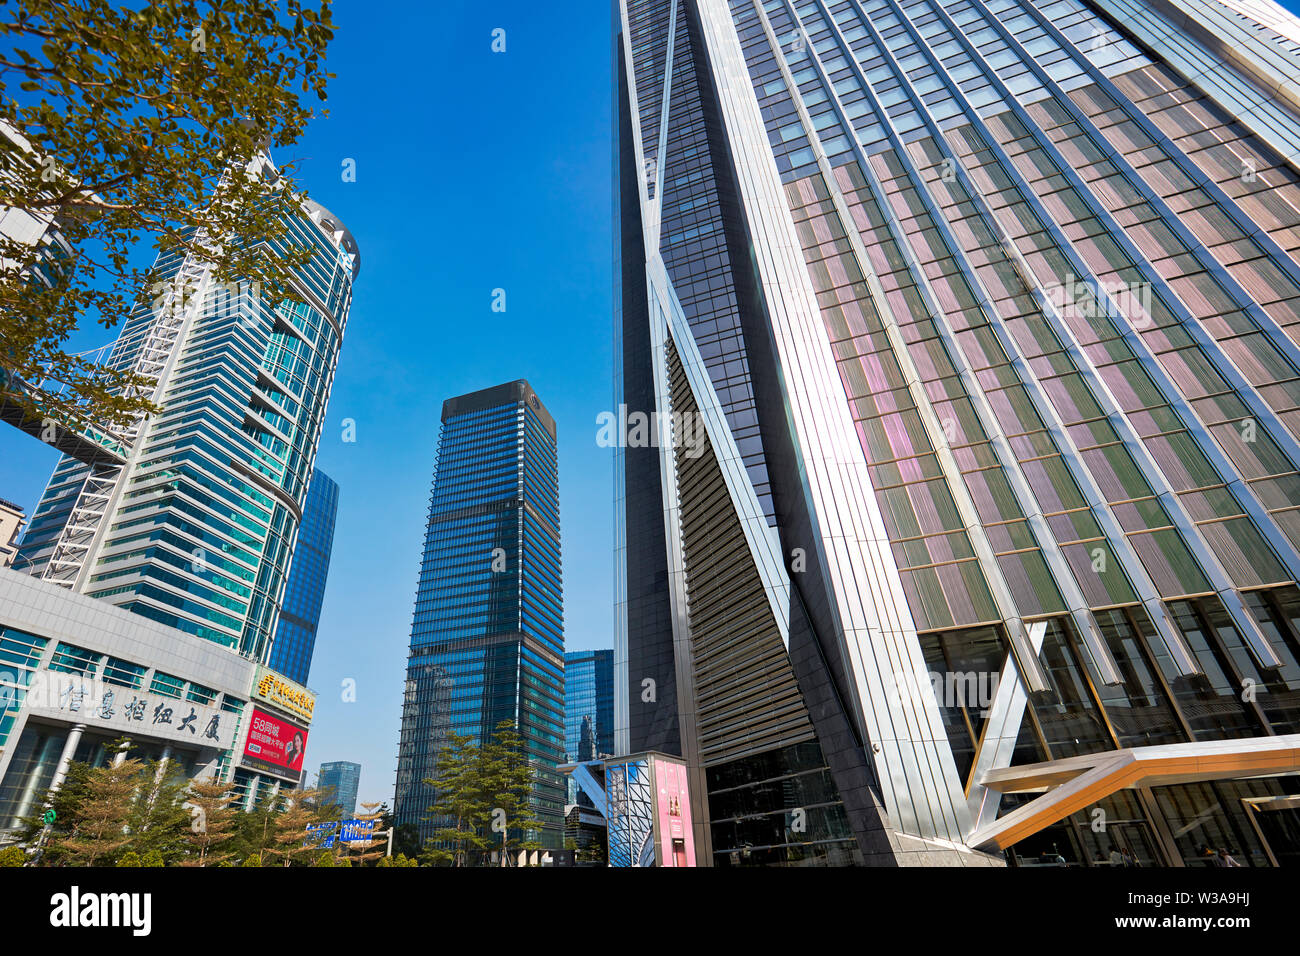 Skyscrapers in Futian Central Business District. Shenzhen, Guangdong Province, China. Stock Photo